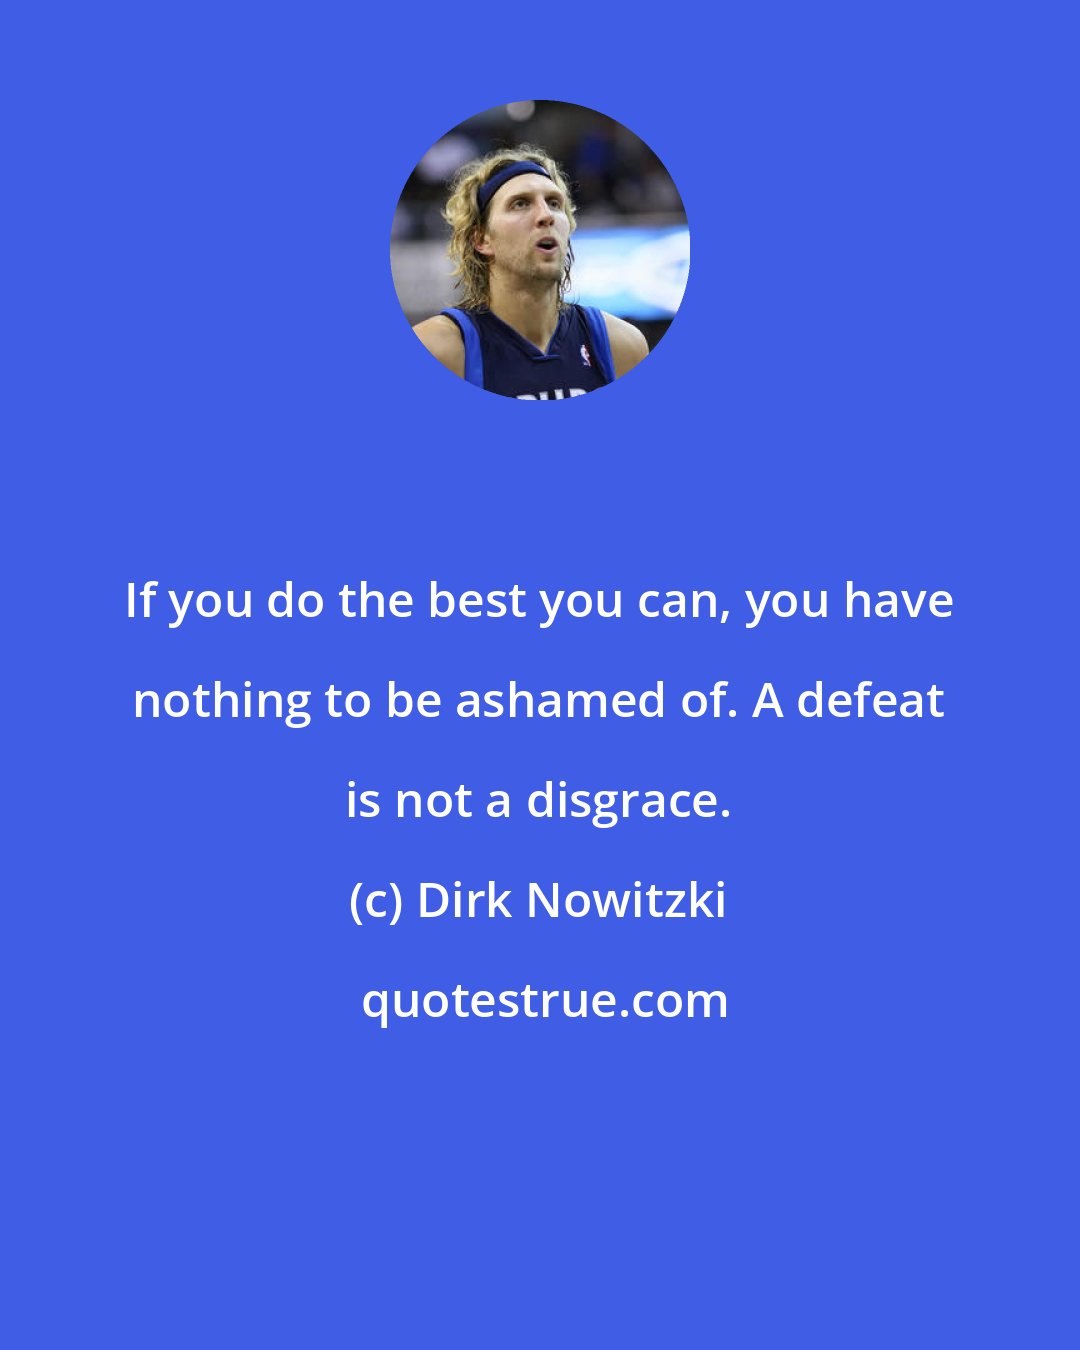 Dirk Nowitzki: If you do the best you can, you have nothing to be ashamed of. A defeat is not a disgrace.